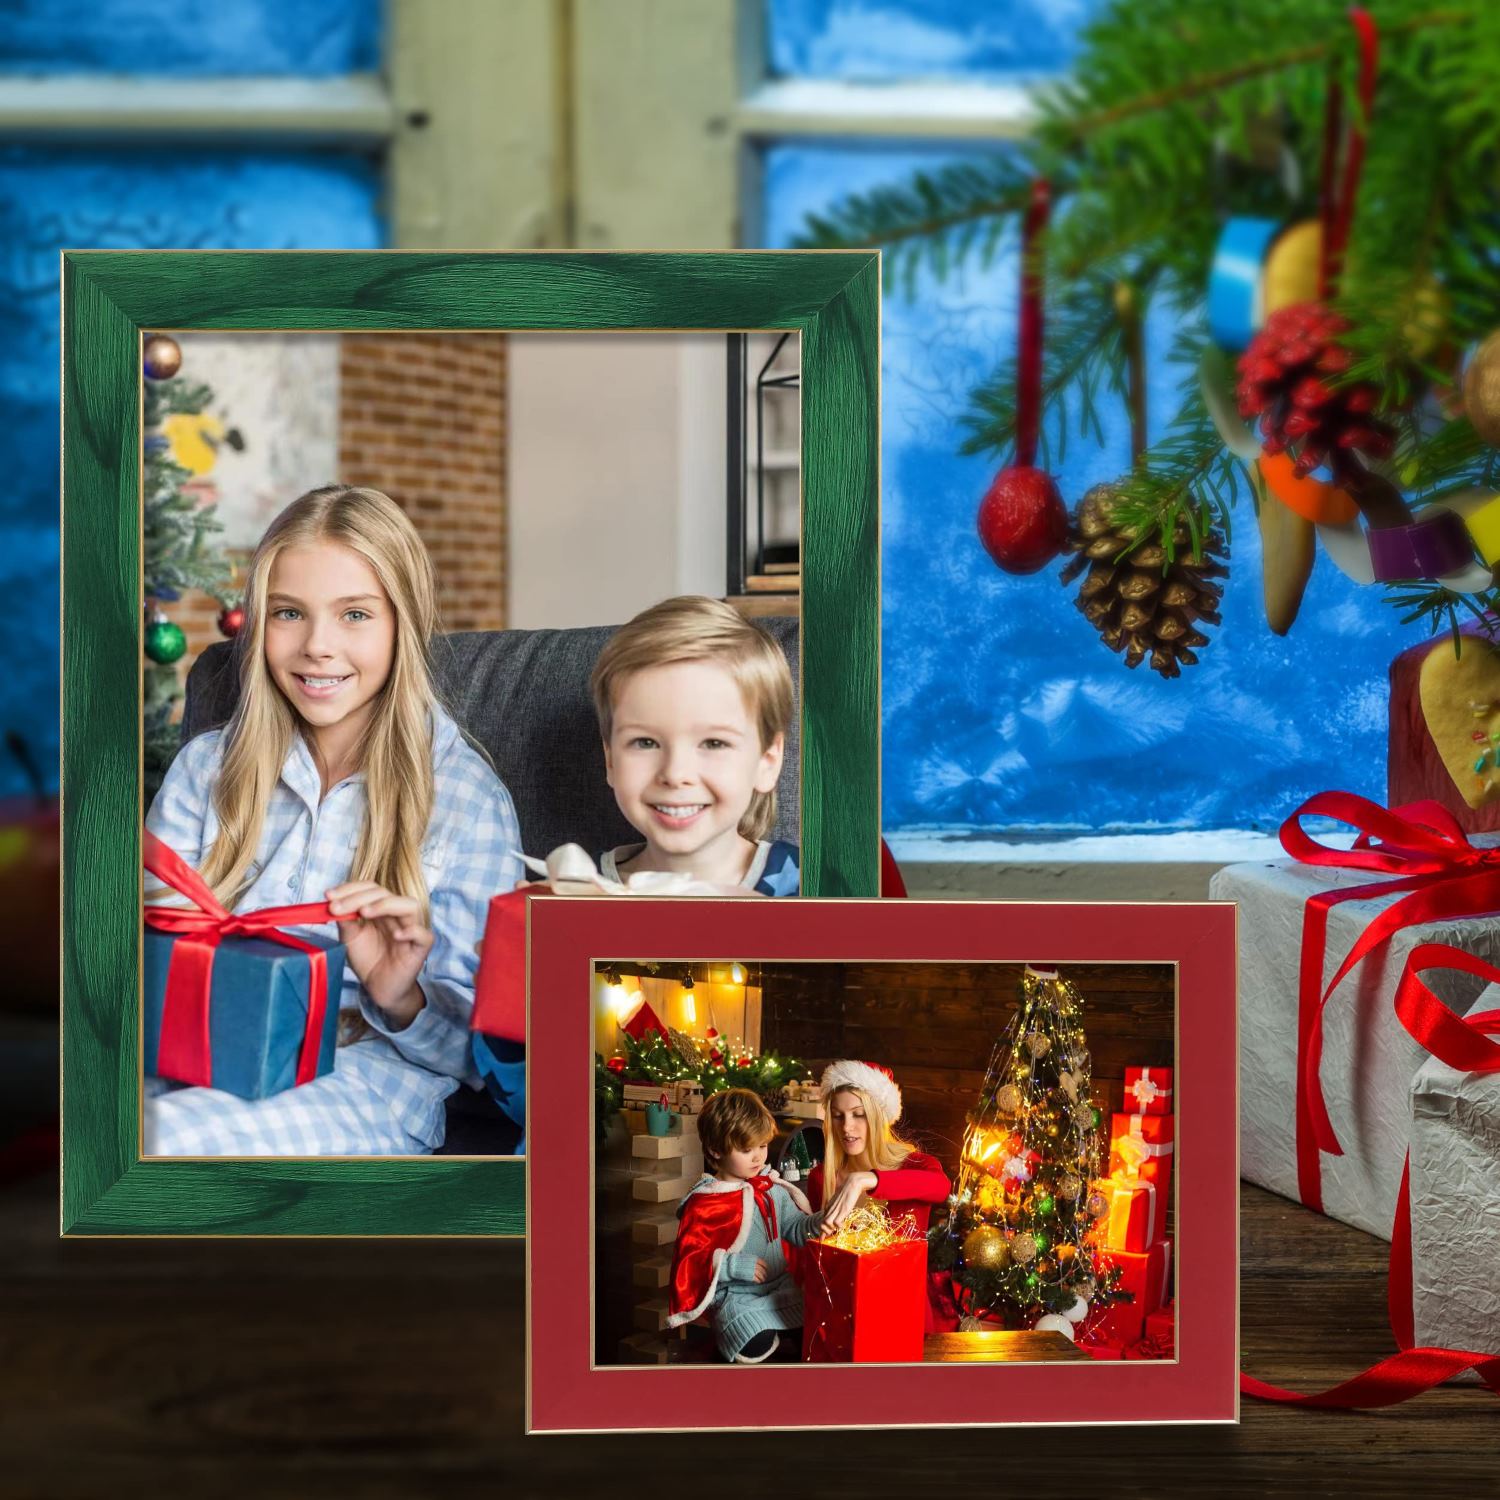 How To Make A Christmas Picture Frame